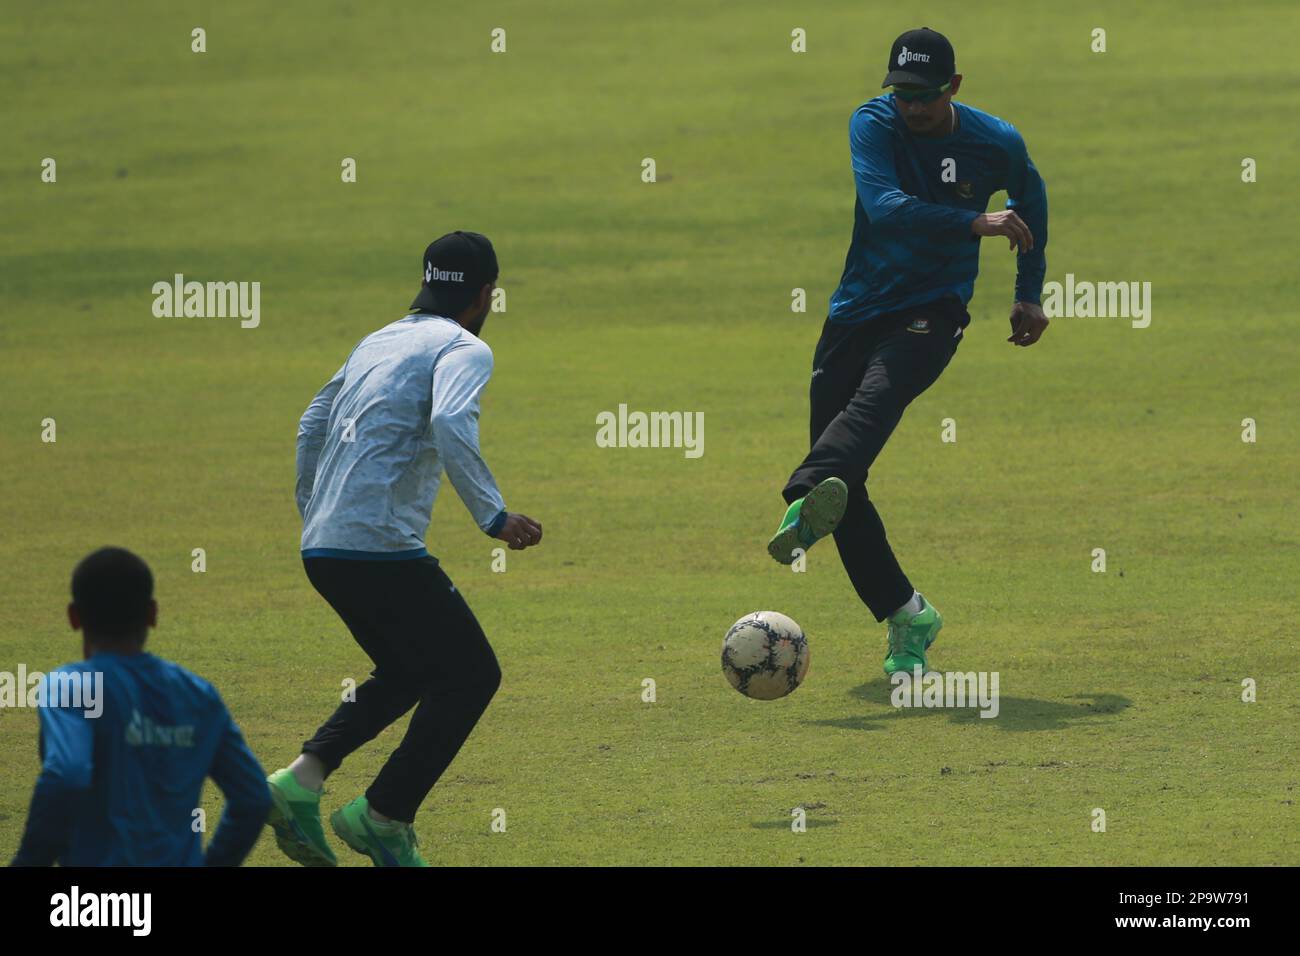 Nasum Ahmed plays football as Bangladesh T20 Cricket Team attends practice ahead of the second match of the series at Sher-e Bangla National Cricket S Stock Photo